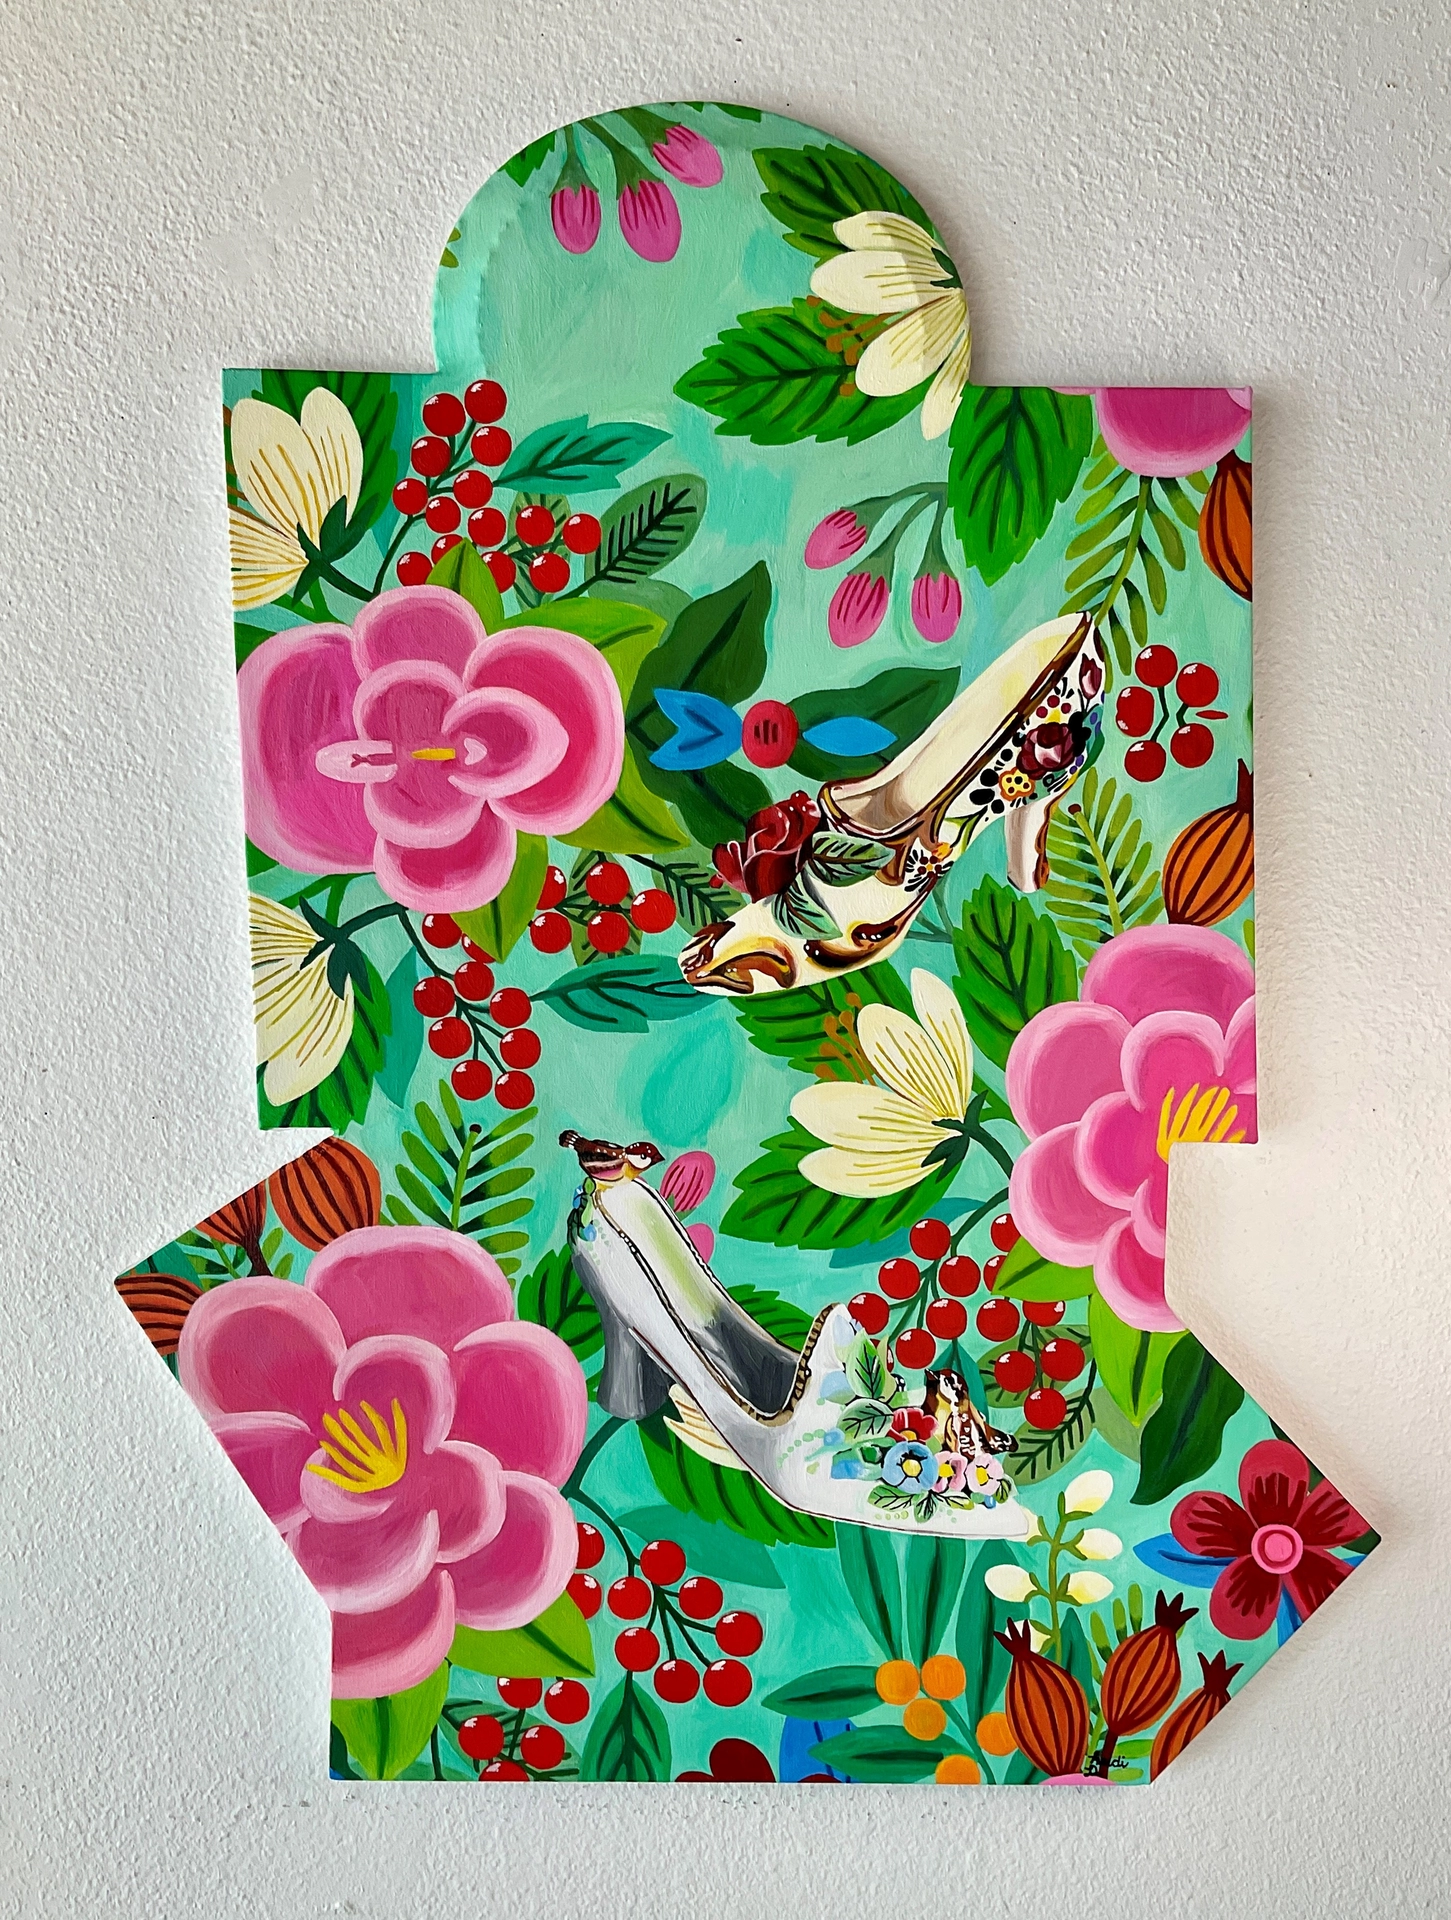 On a custom made canvas in a jigsaw puzzle shape a collage of images of heeled embroidered slippers, florals, and greenery from fashion magazines are compiled into a fluid, floral arrangement in a potent, vibrant, and feminine color scheme inspired by fashion print.